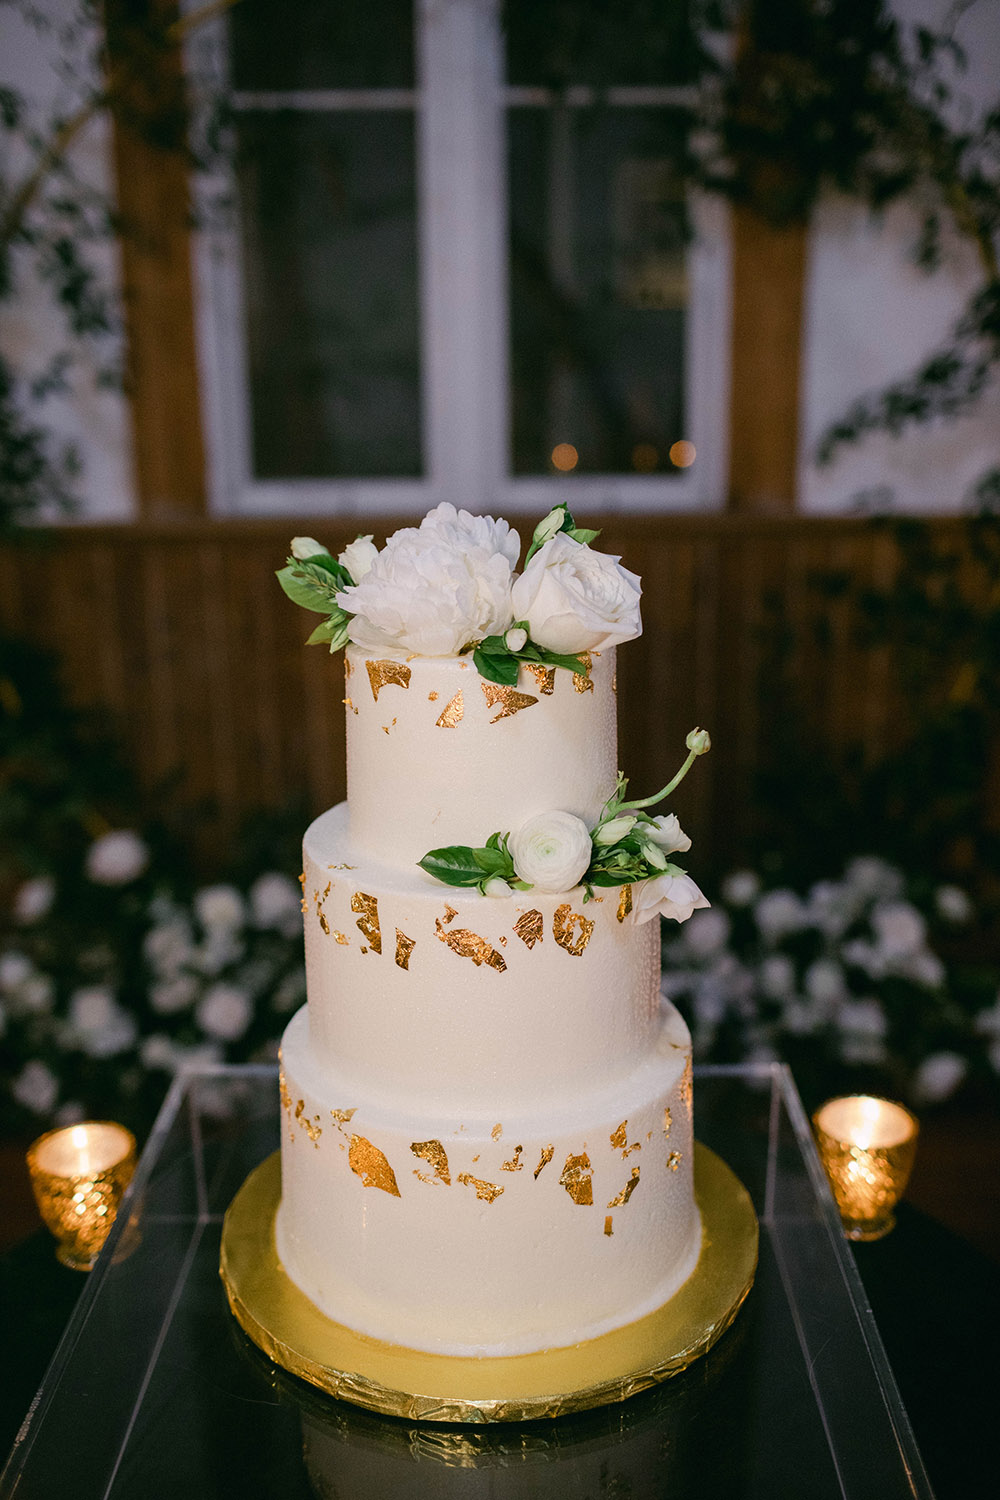 the wedding cake with edible gold leaf